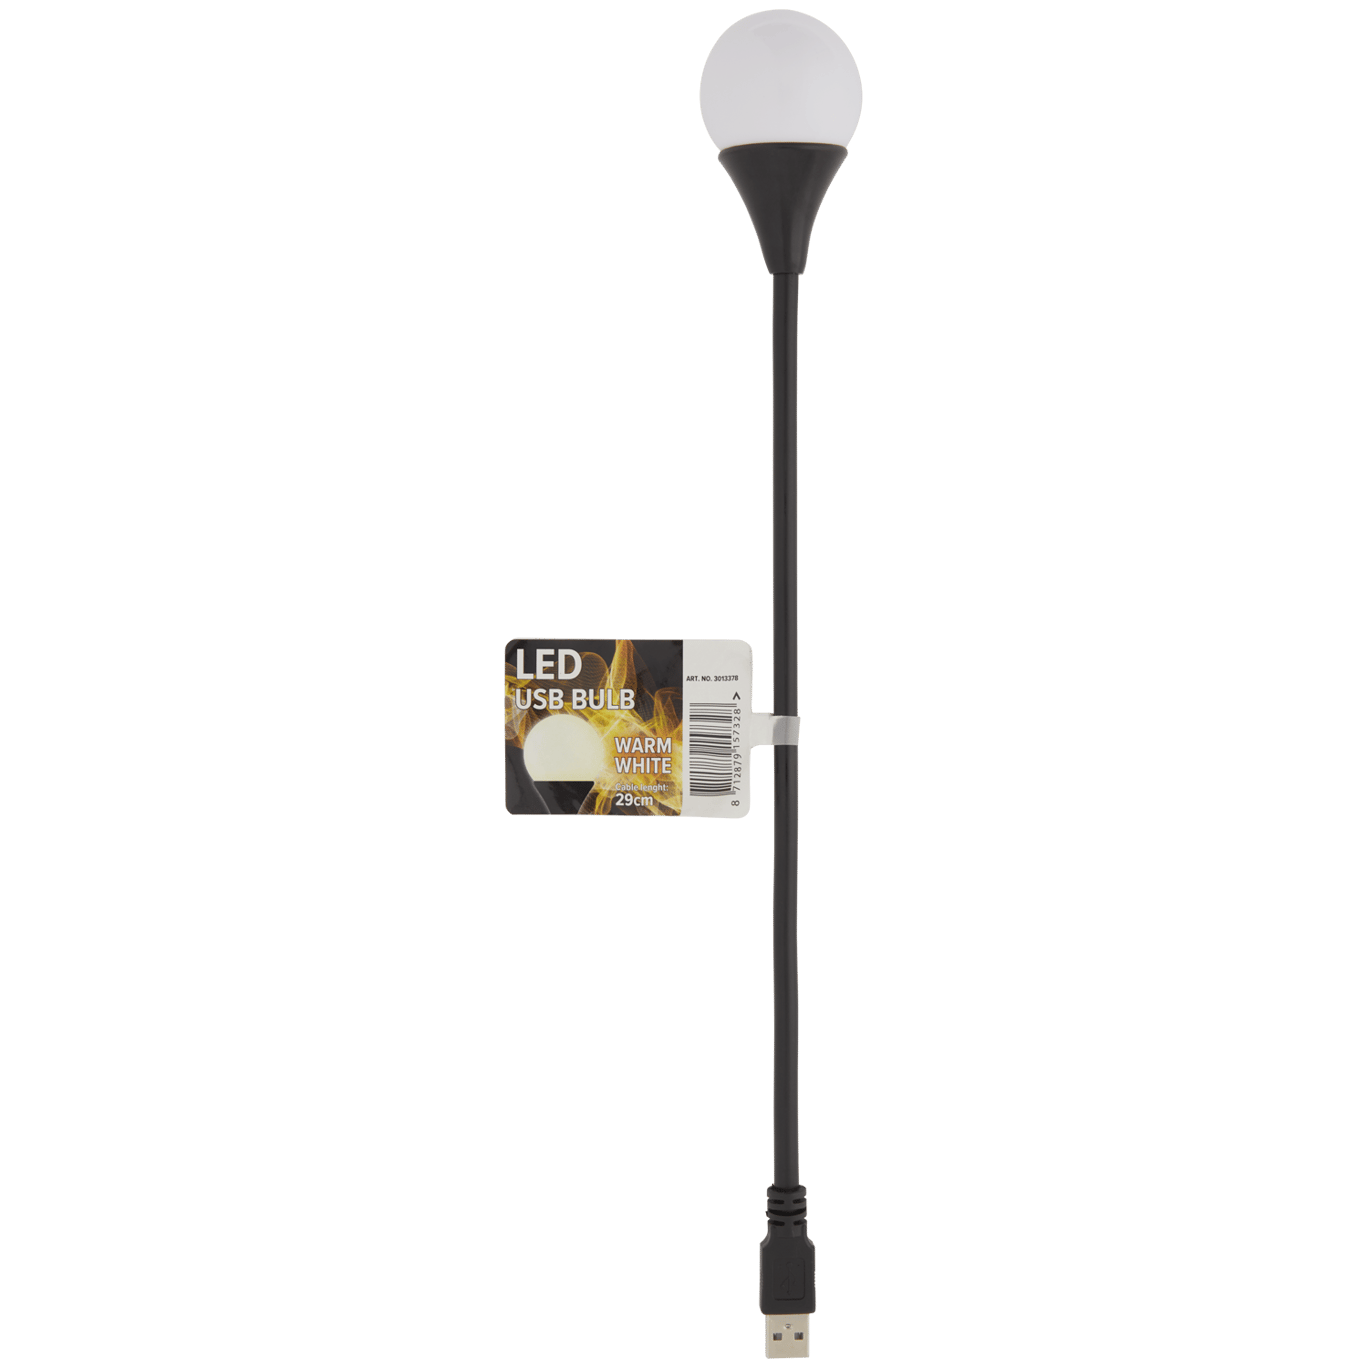 zaad grens Uitgang Eurodomest led usb-lamp | Action.com